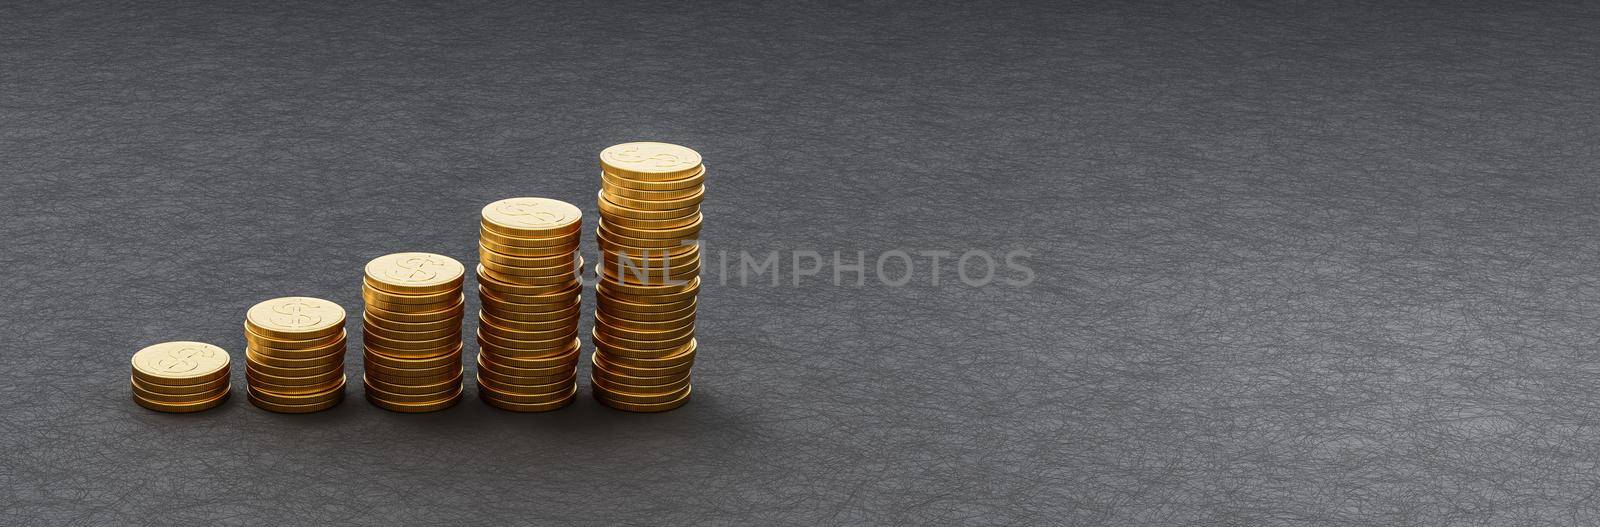 Rising Heaps of Coins on Dark Background with Copy Space by make